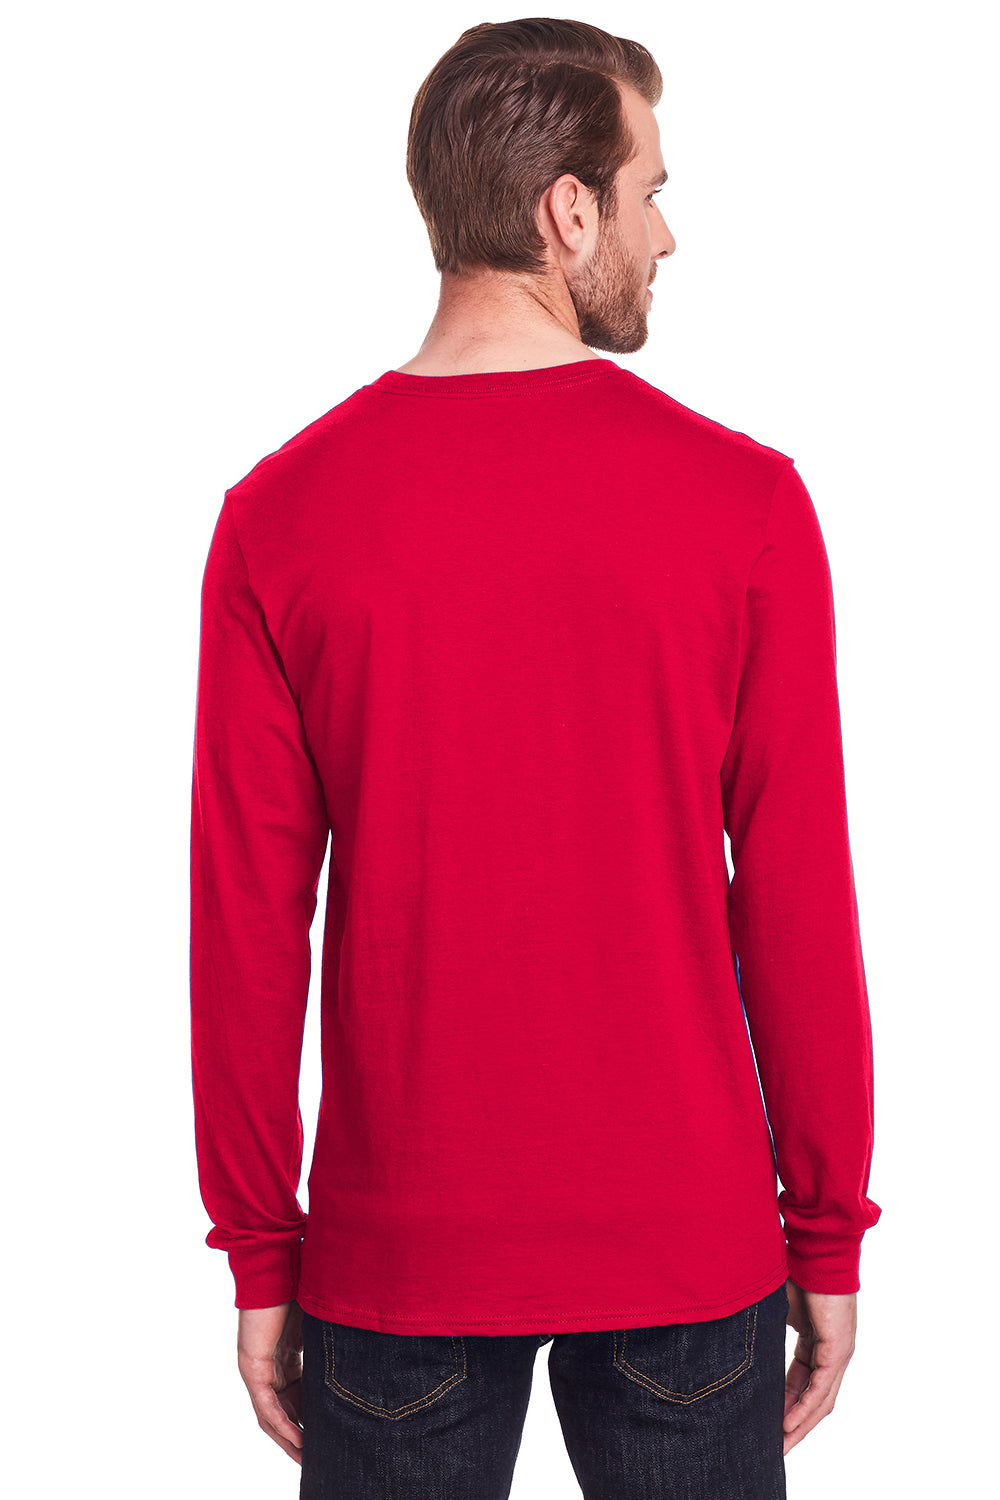 Fruit Of The Loom IC47LSR Mens Iconic Long Sleeve Crewneck T-Shirt Red Back